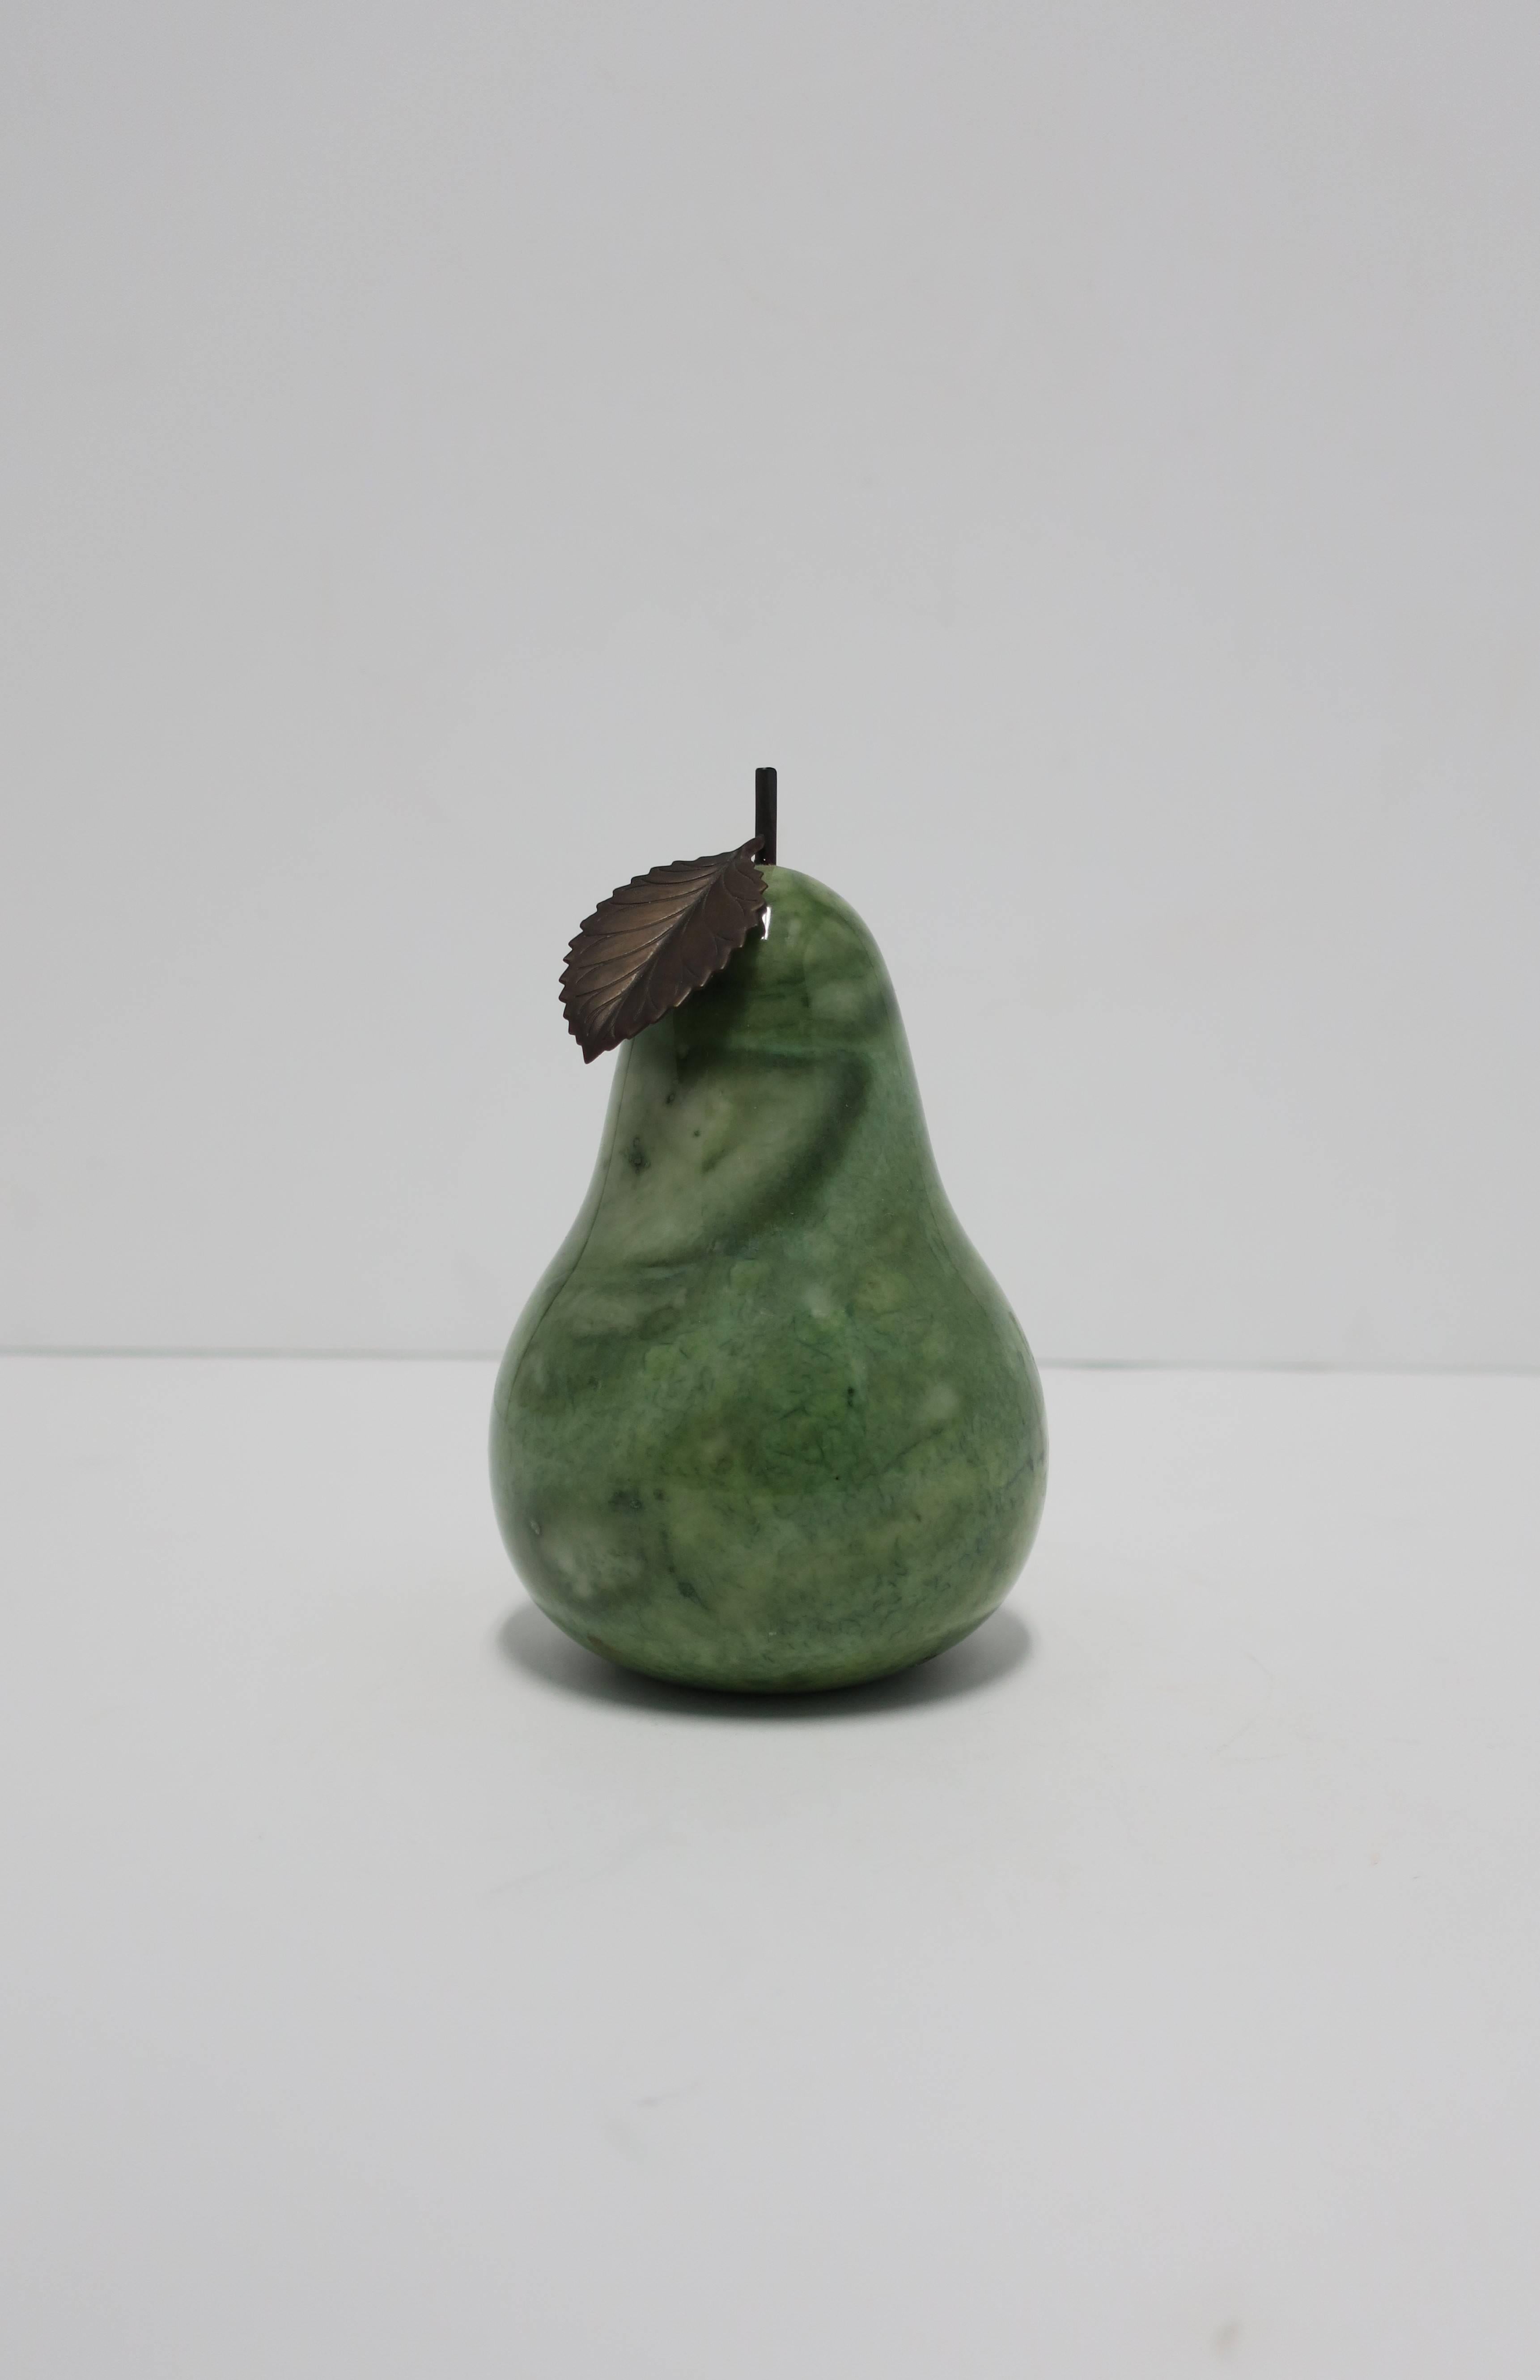 A beautiful Italian green alabaster marble decorative pear sculpture with leaf and vine design, Italy. Alabaster marble pear is polished smooth with brownish metal leaf and vine design at top. Label on bottom reading hand-carved from Italy. 

Pear